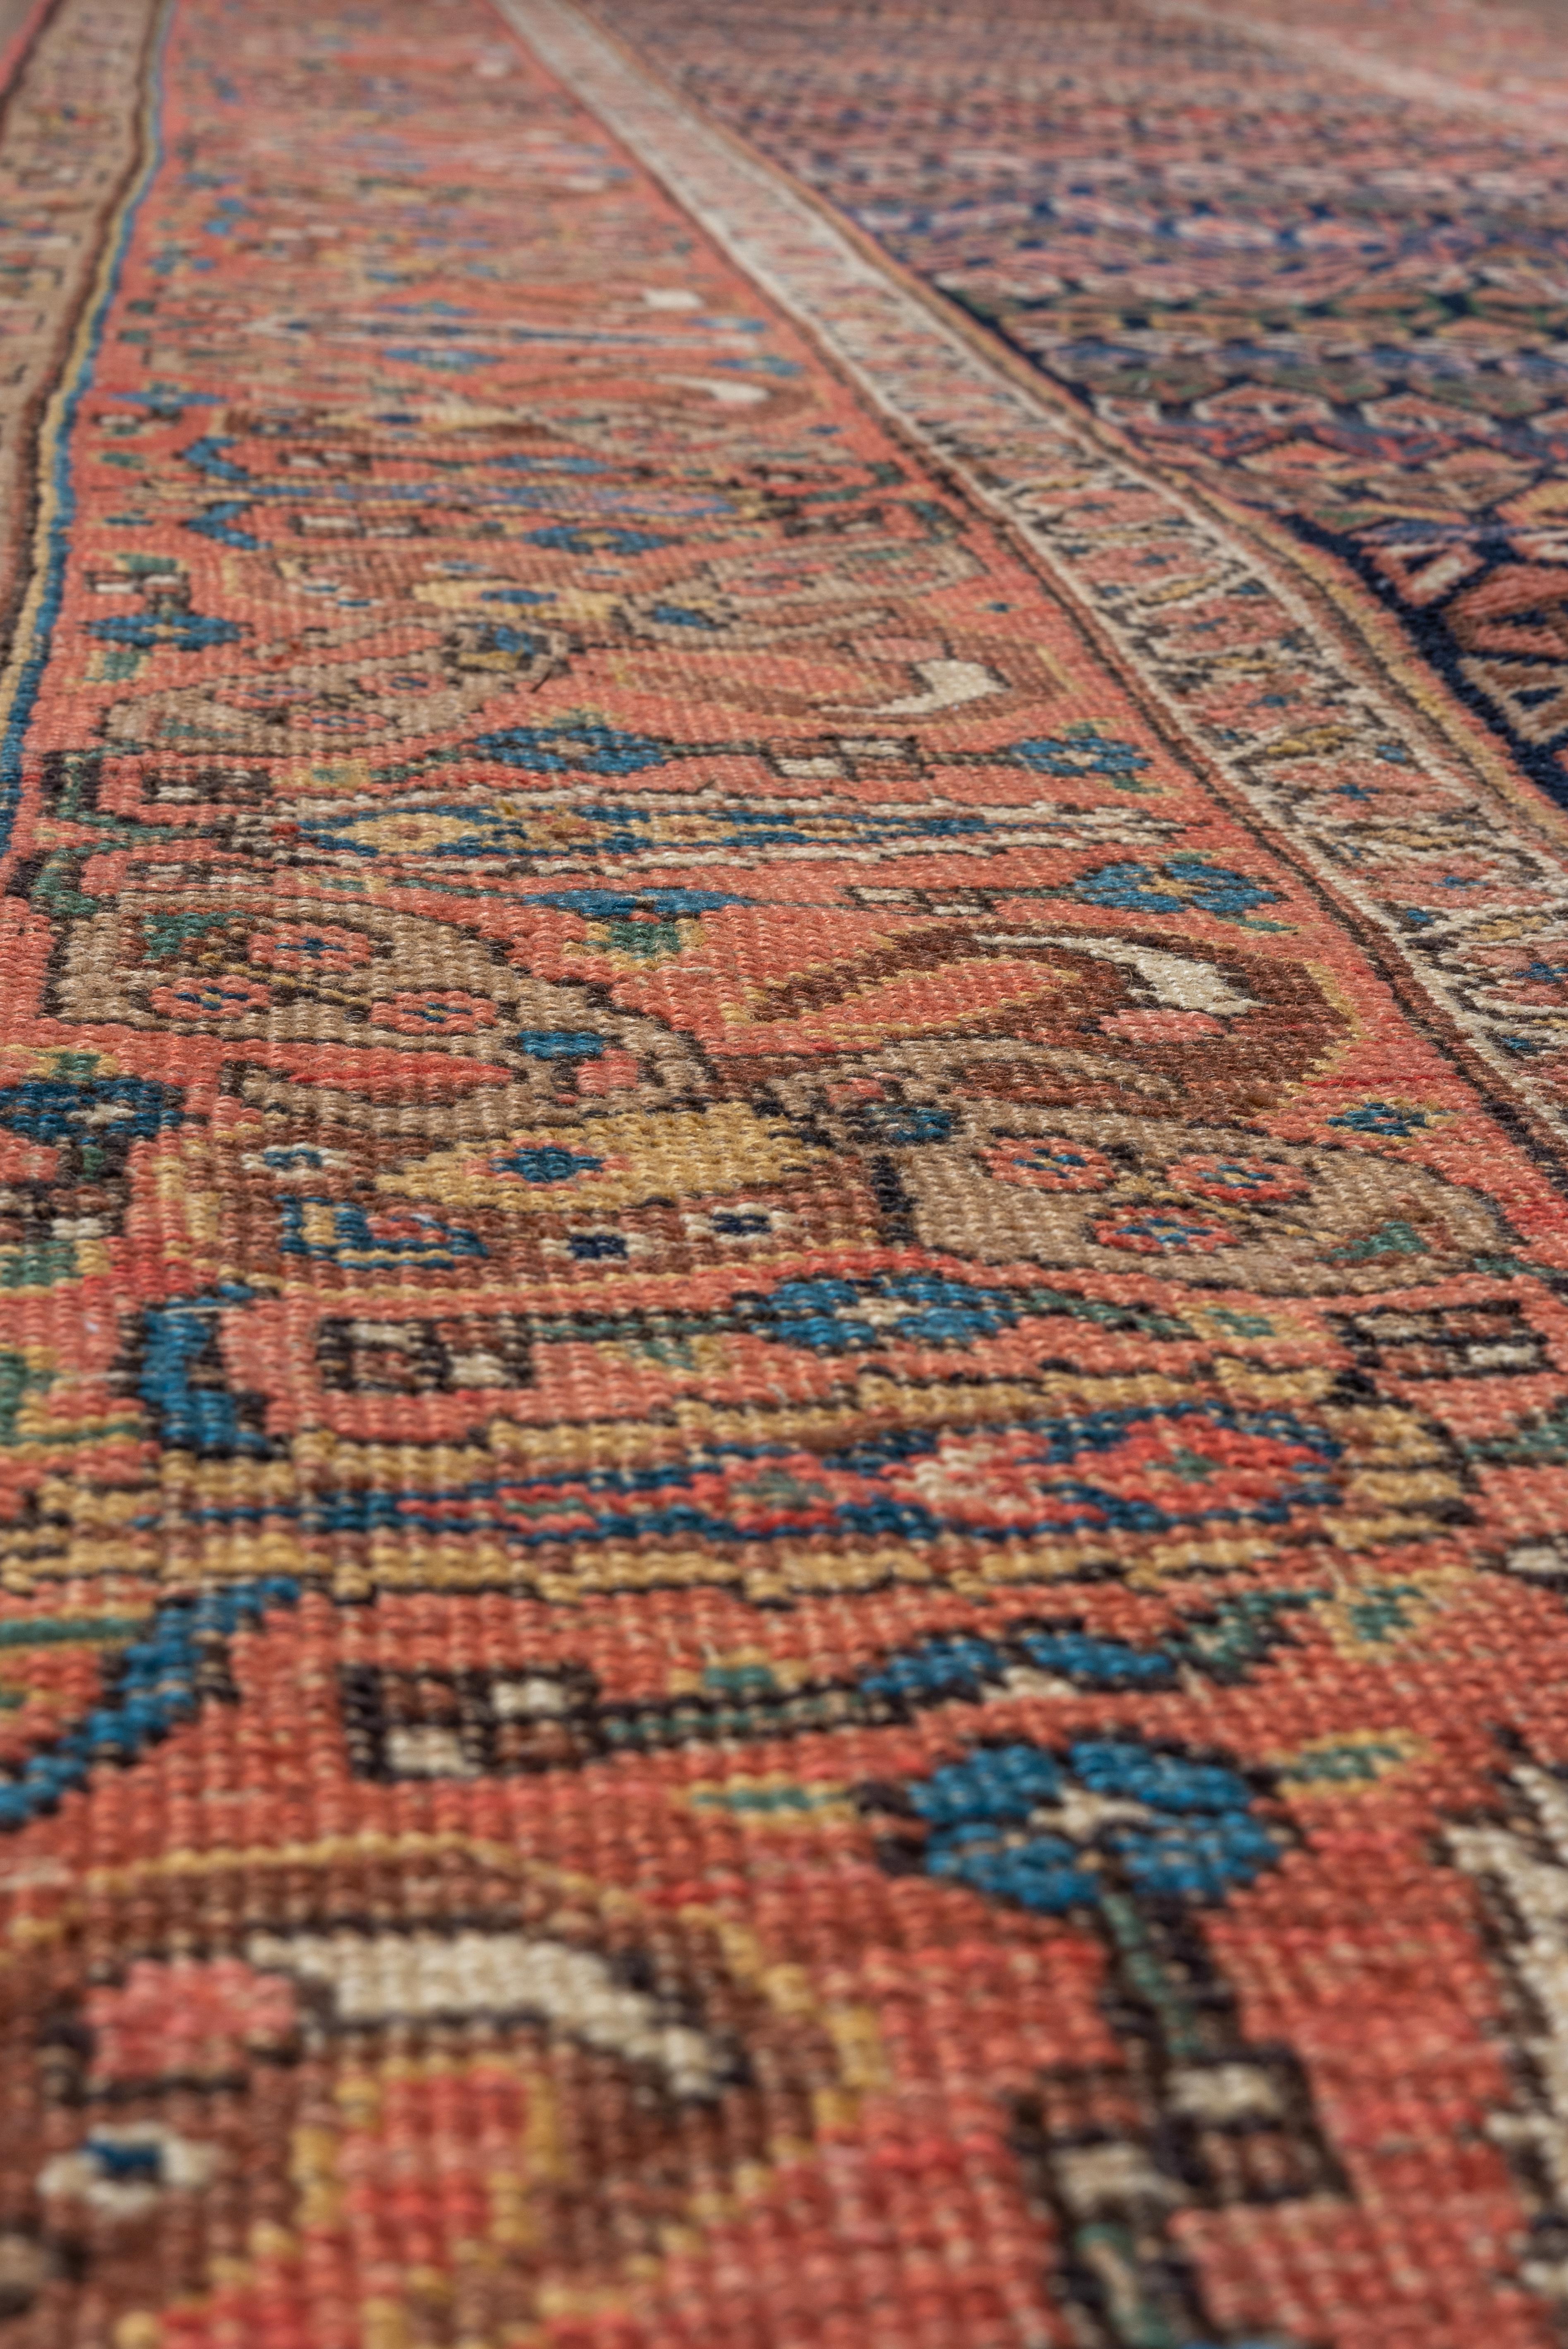 Bidjar rugs, also known as Bijar rugs, are a type of hand-woven rug that originated in the town of Bidjar in the Kurdistan region of Iran. They are highly regarded for their exceptional durability, dense pile, and intricate designs. Bidjar rugs are